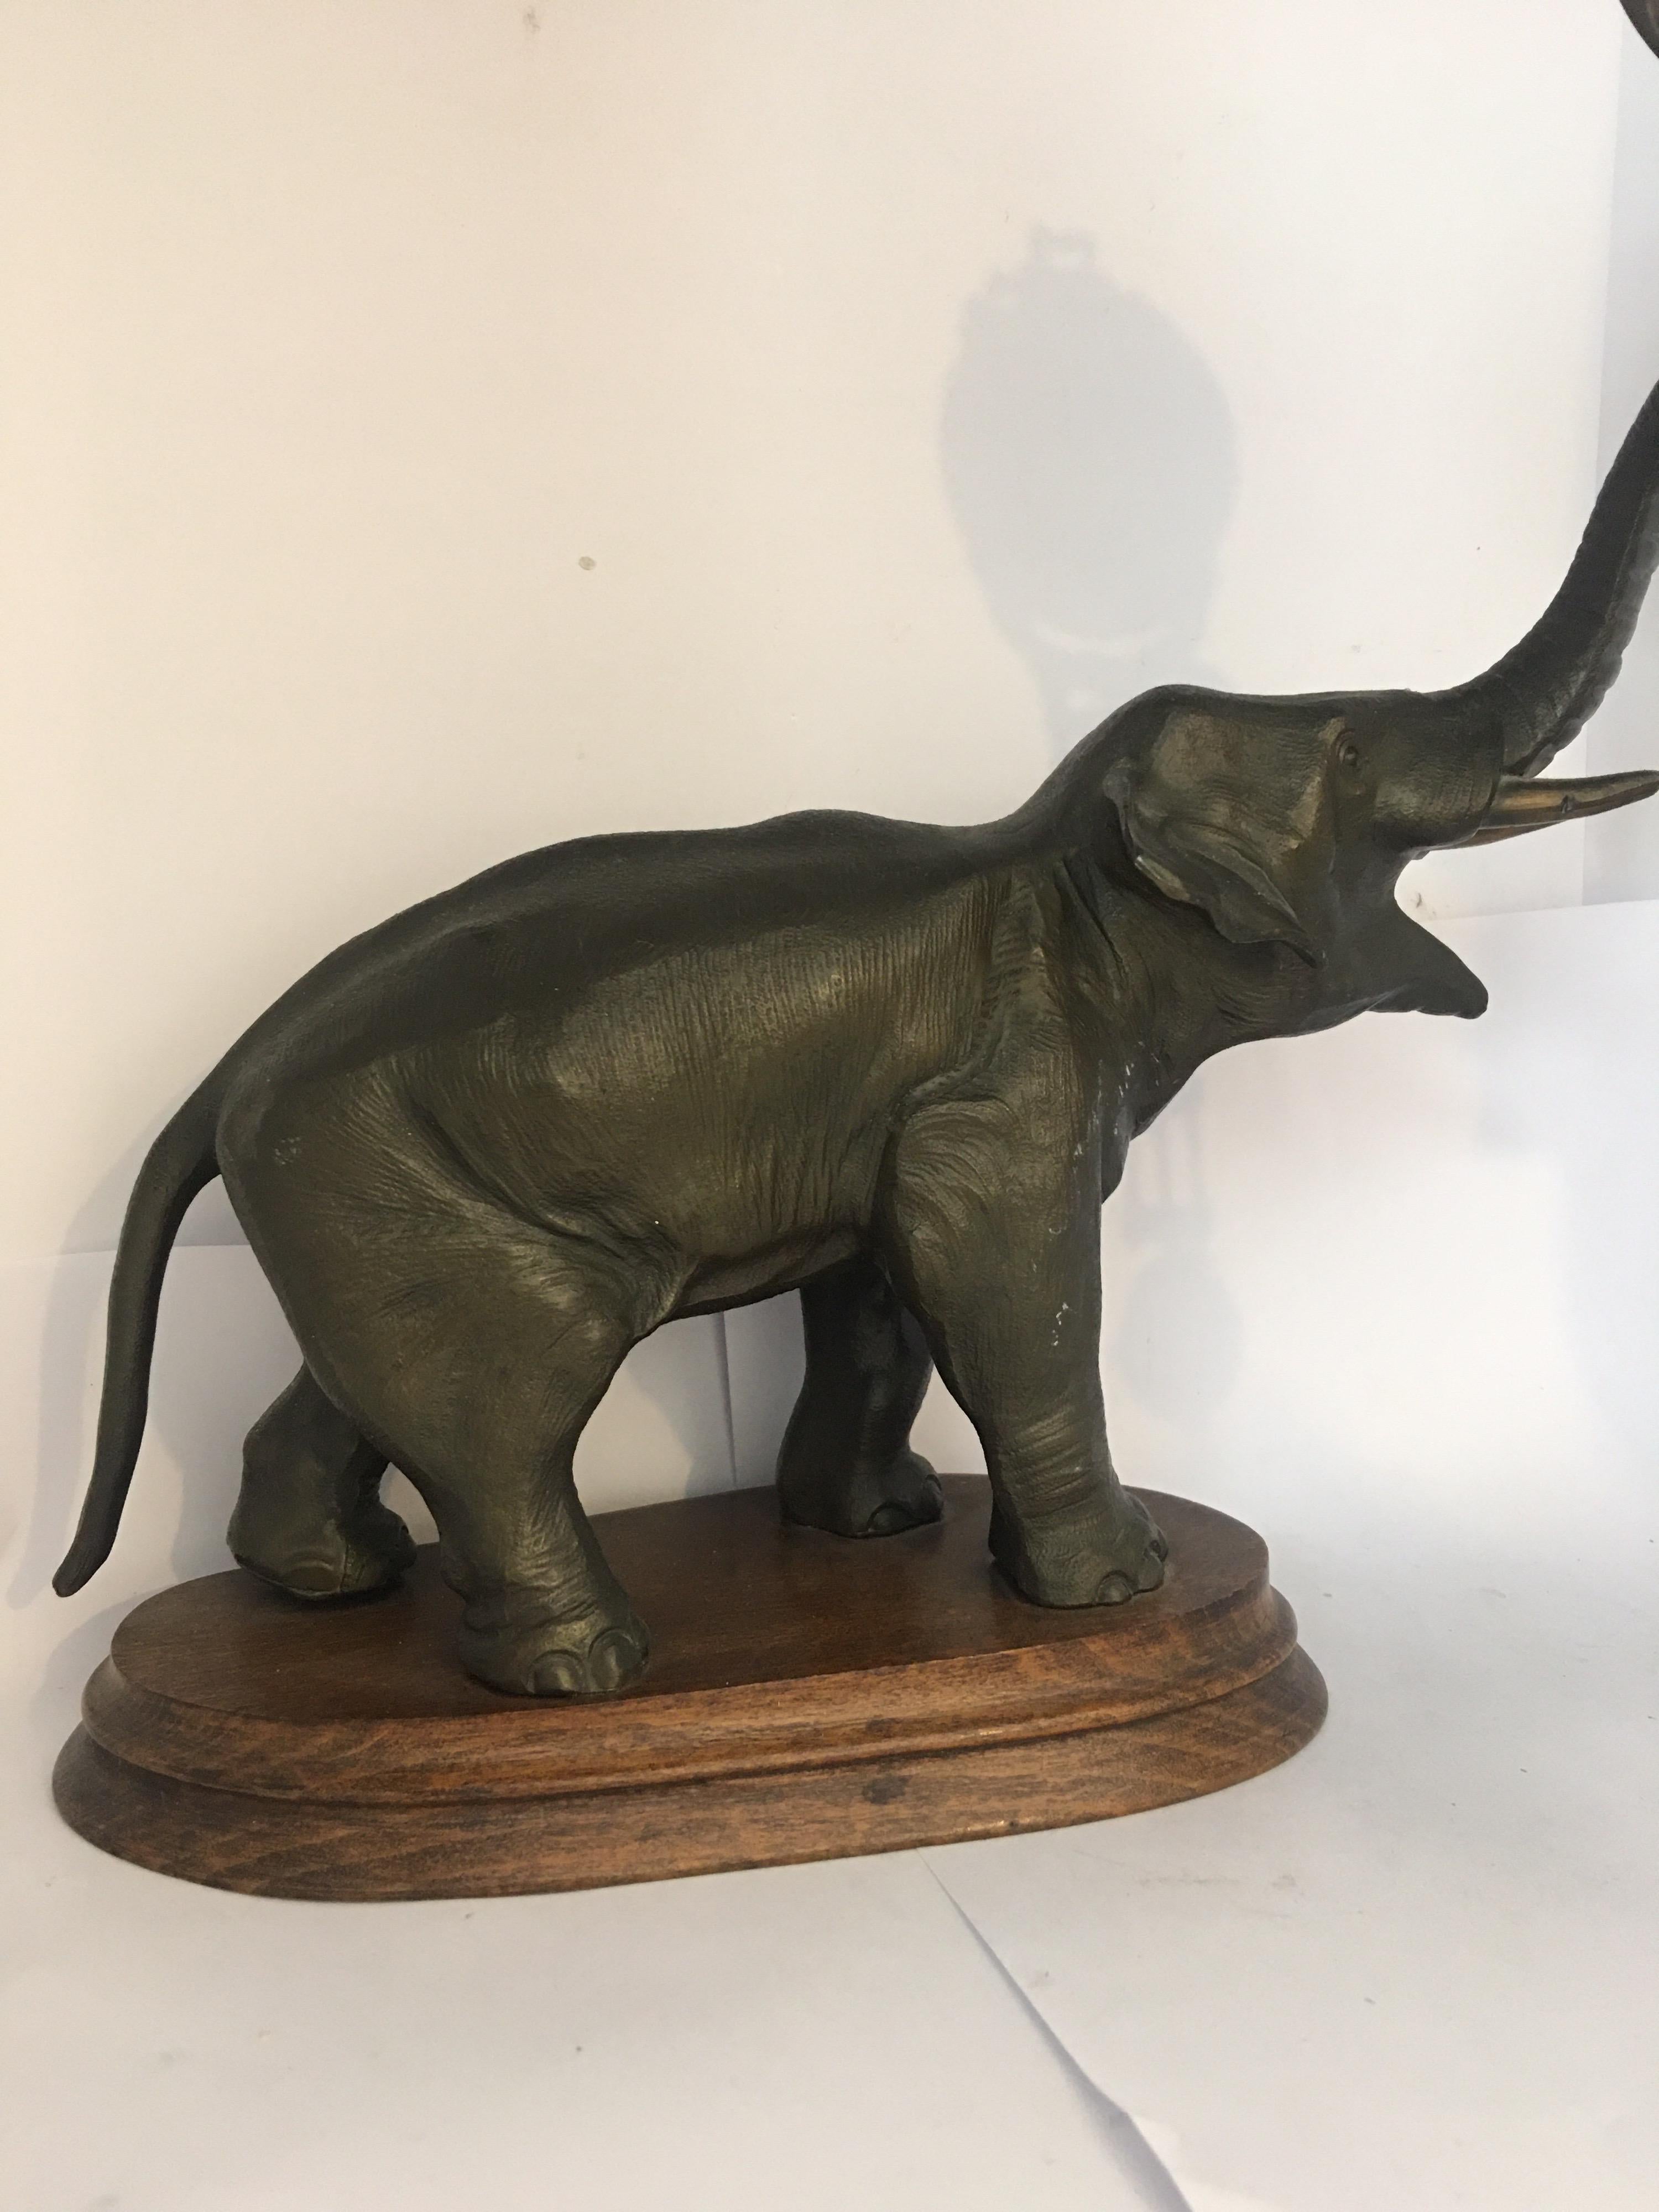 This beautiful antique bronzed elephant swinging clock is in good condition. Visible signs of ageing and wear as shown. Please study the images carefully as form part of the description.